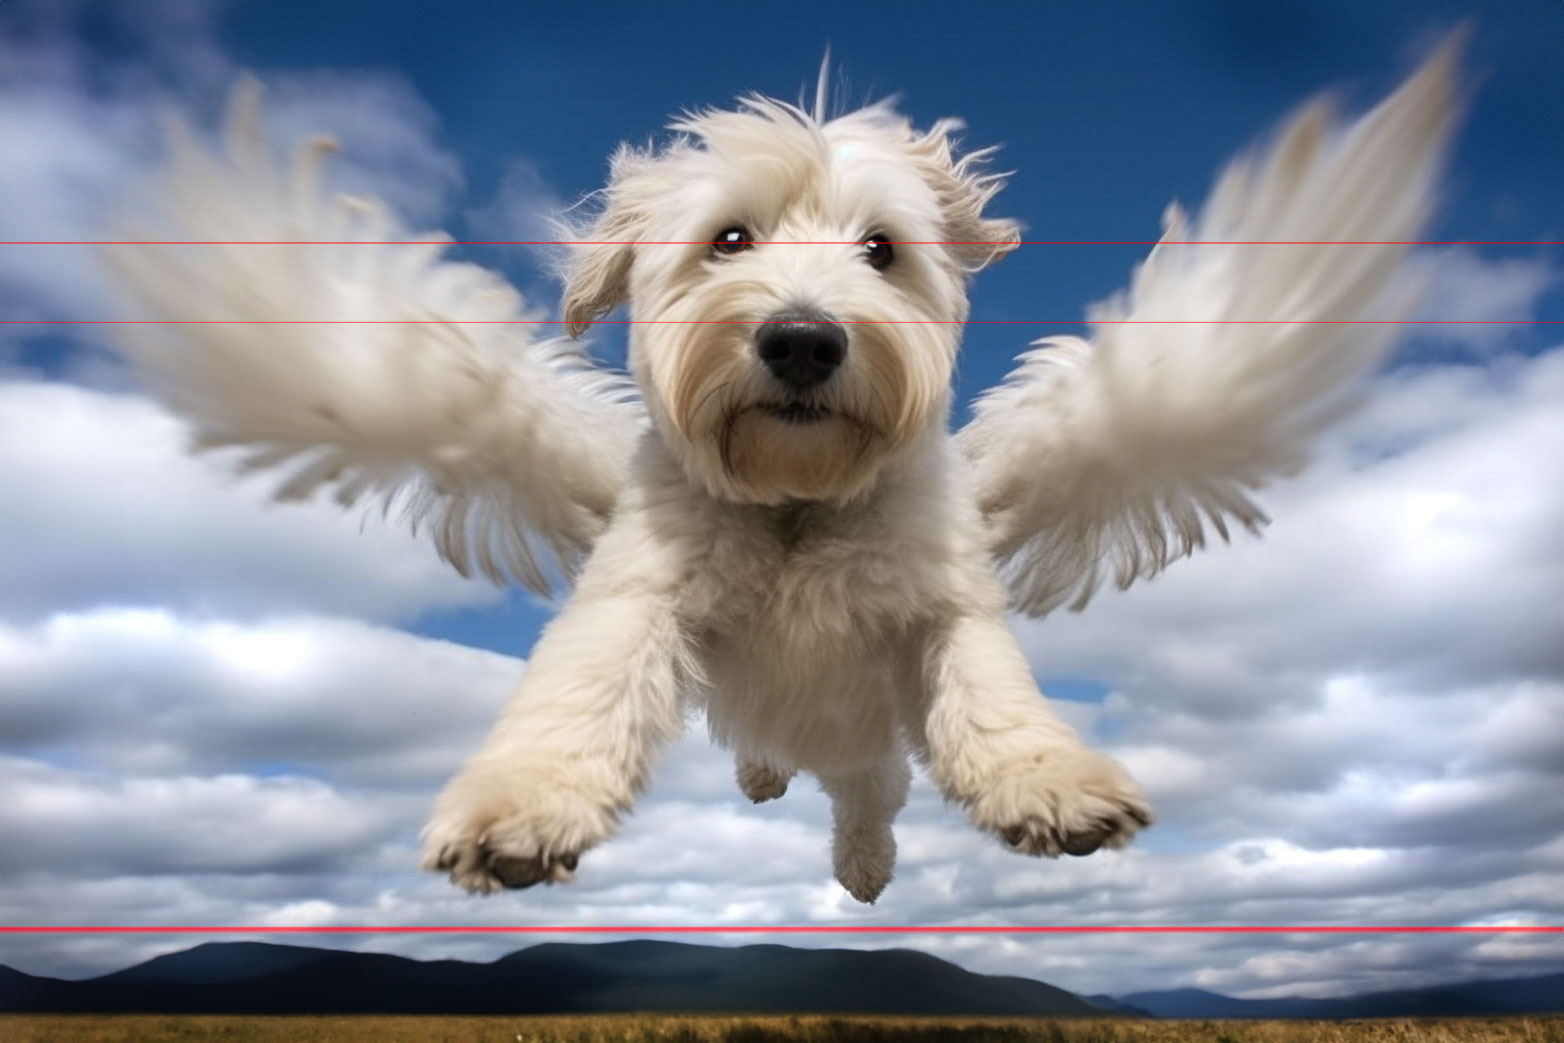 In this picture, a light colored Wheaten Terrier with wings is flying toward the viewer out of a blue sky, scattered white clouds and a landscape with distant mountains. It wears a beatific dog smile as he looks down below.